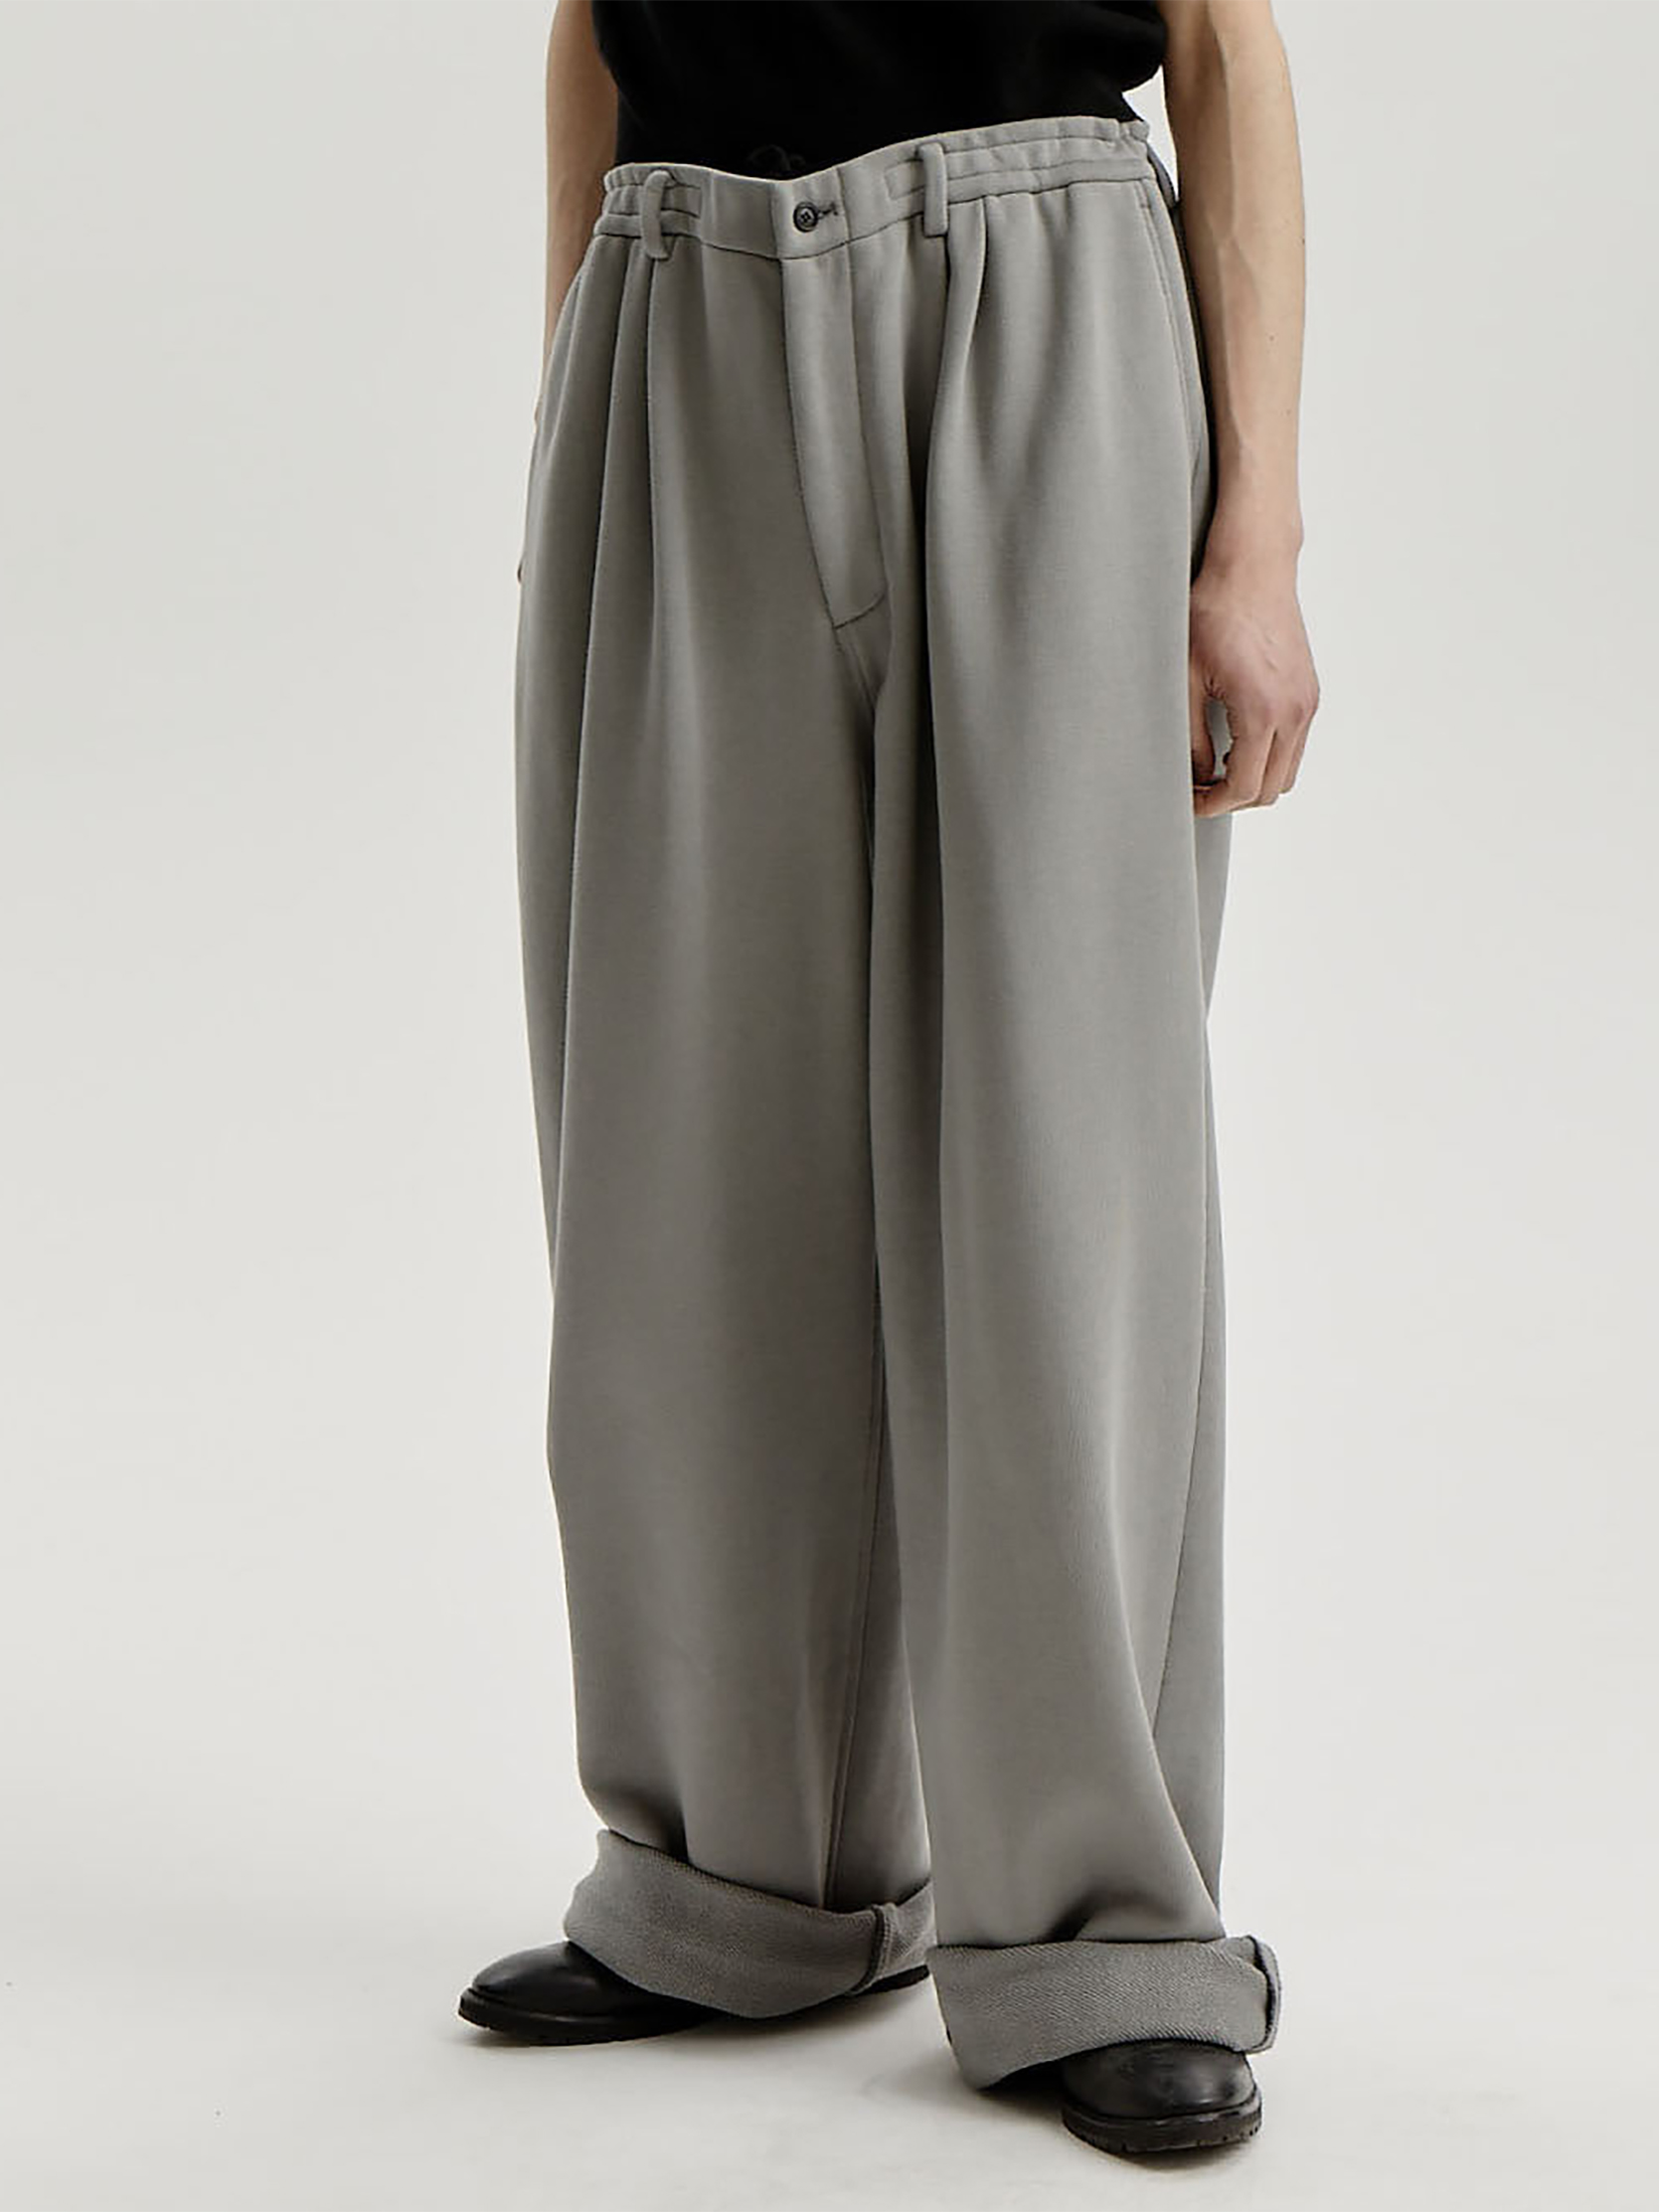 Steel Grey Jersey Comfy Wide Trousers